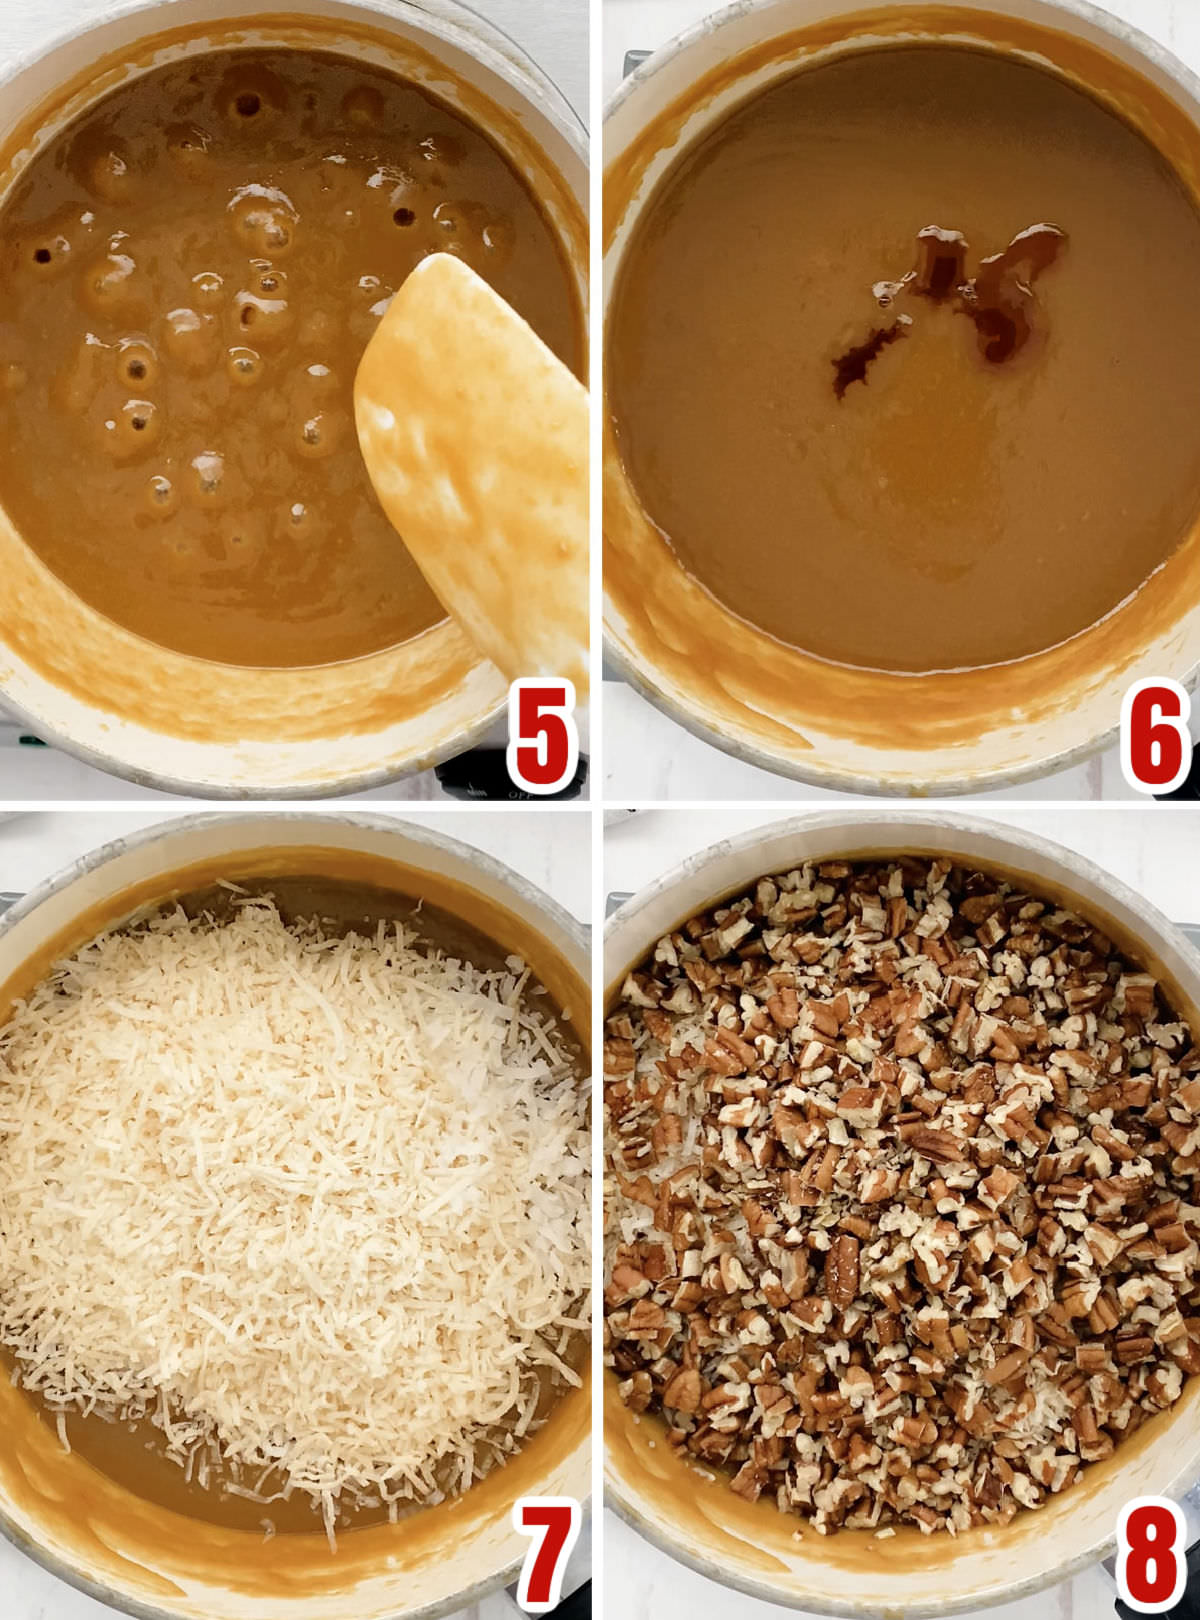 Collage image showing the steps for adding the coconut and the chopped pecans into the caramel mixture.